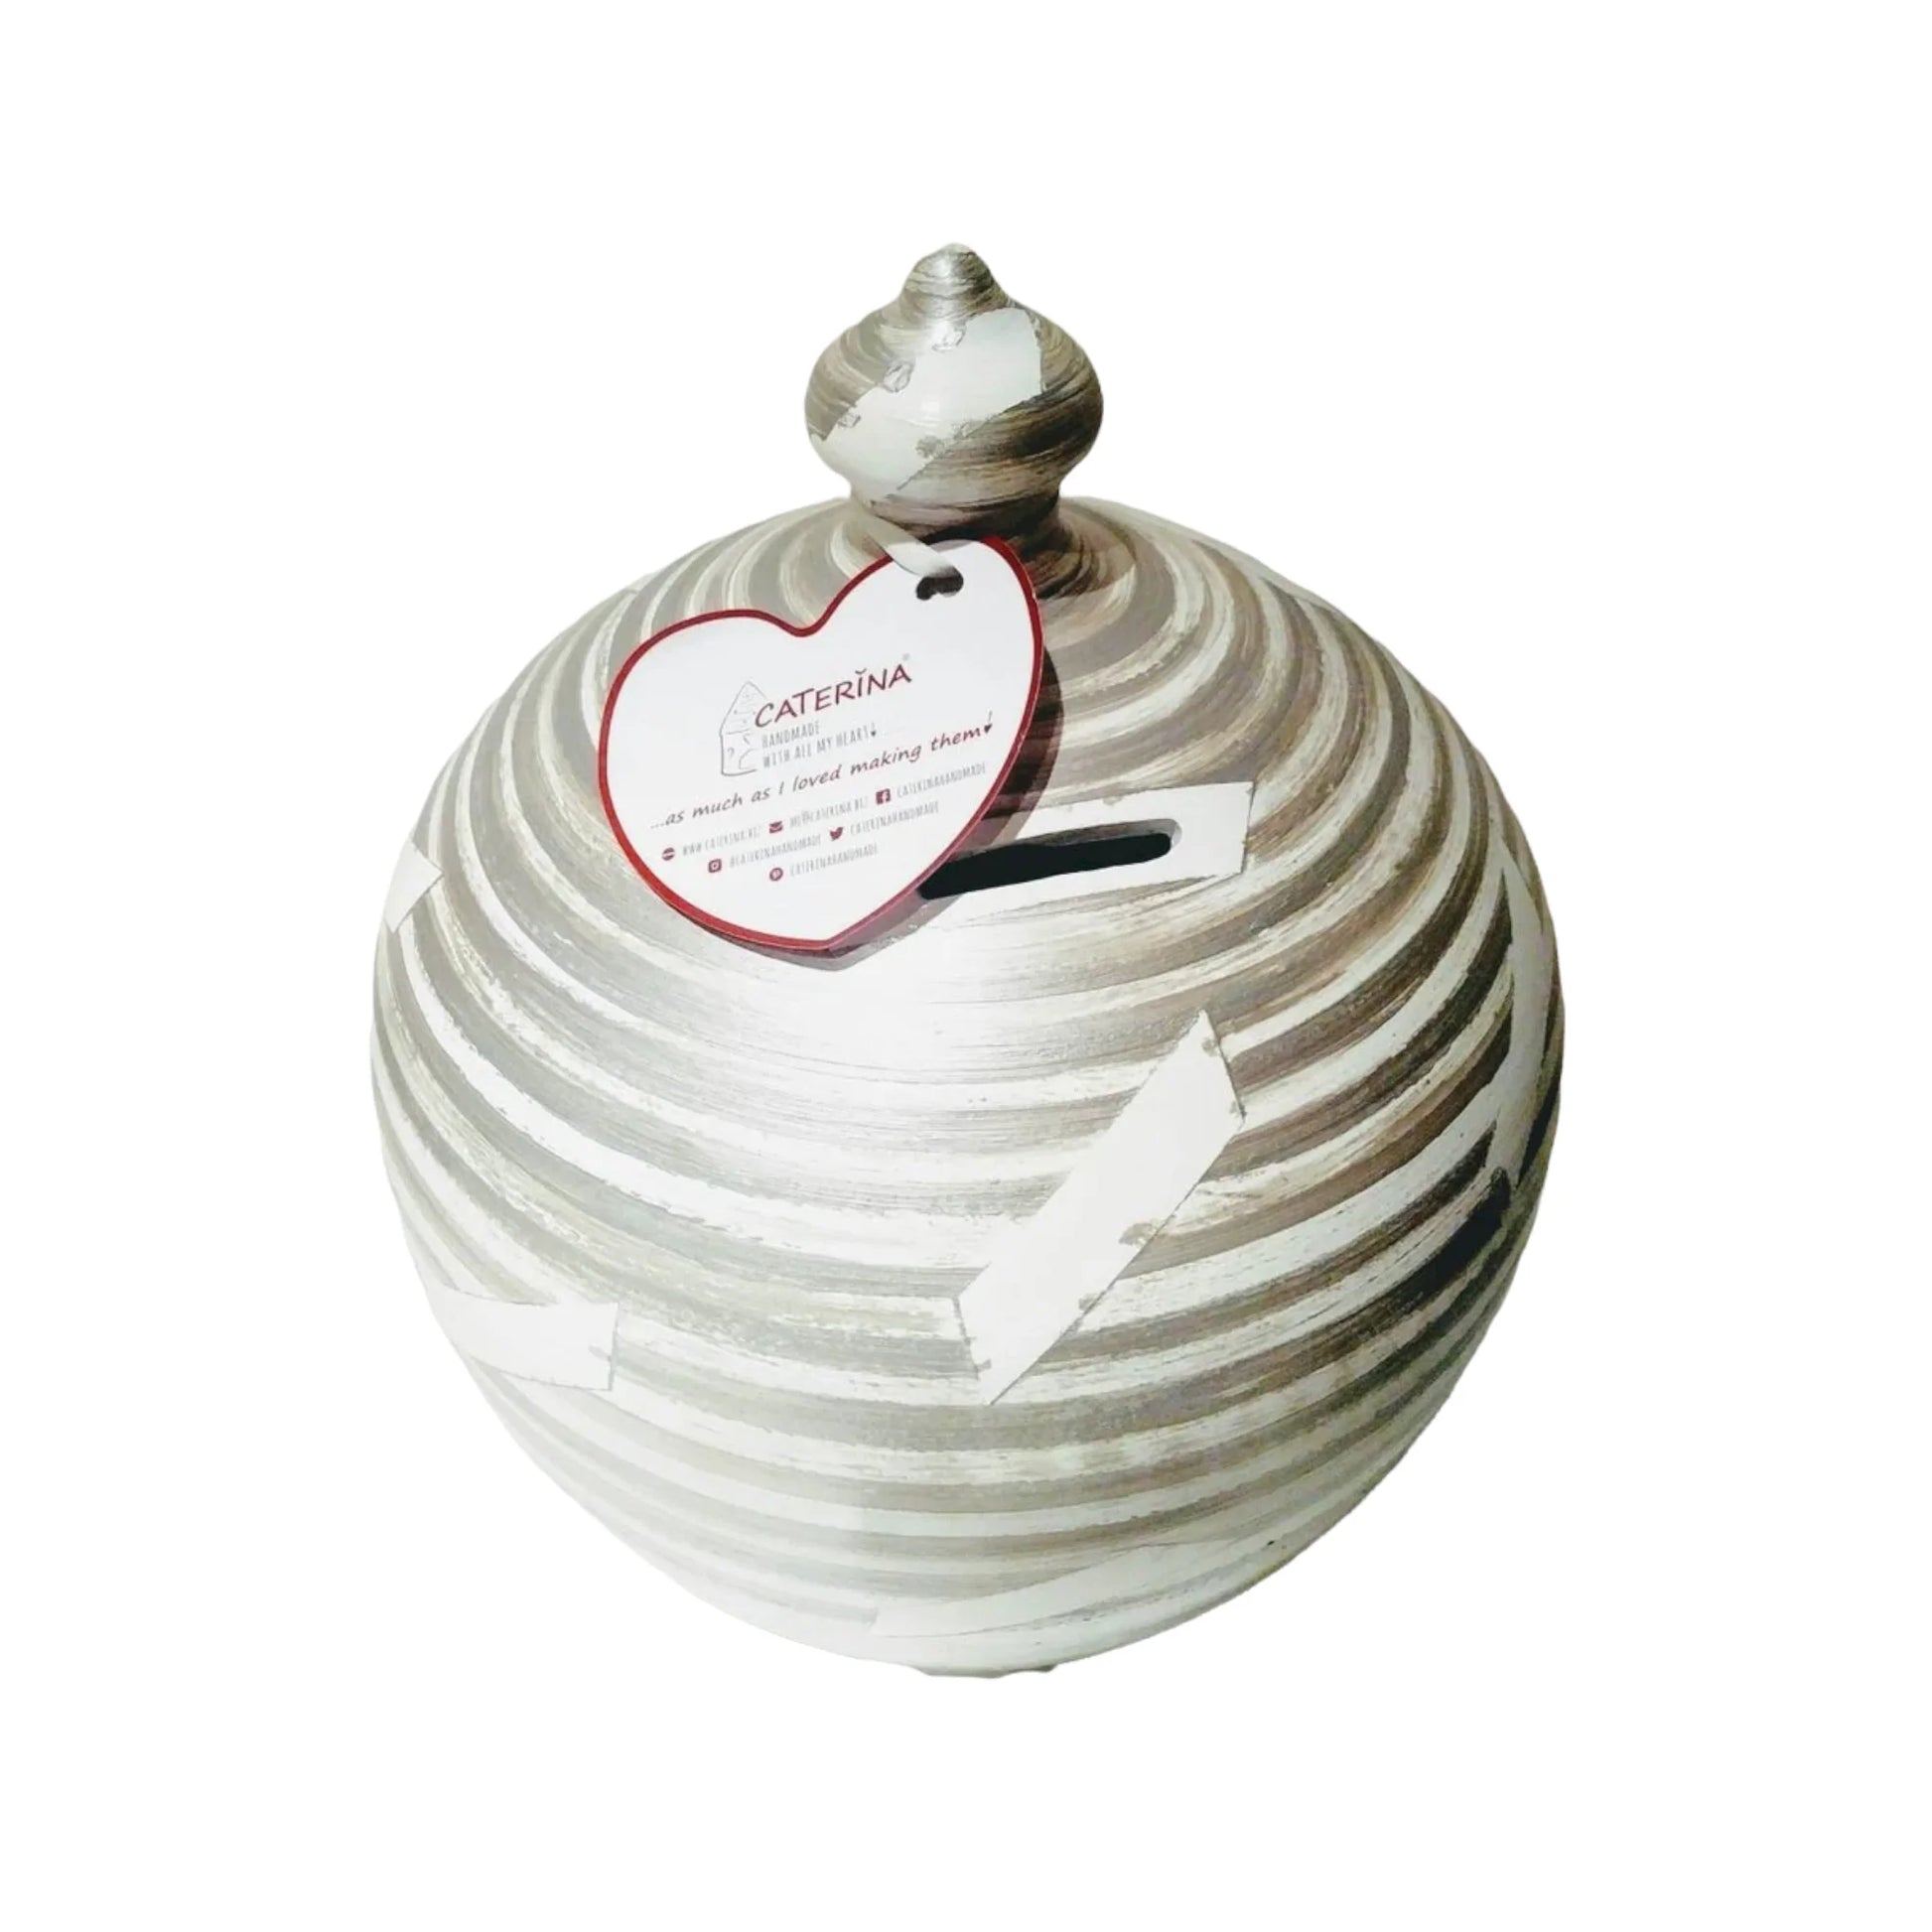 A coin bank for your cash savings, so stunning and stylish that you will never want to break open. Handmade to order in my studio in Rome, Italy, it is the perfect gift for women and men. Colors: Silver & White,  Size: 20 cm = 7.874 Inches. Circumference: 52 cm = 20 inch.  With hole and stopper plug, or without hole.